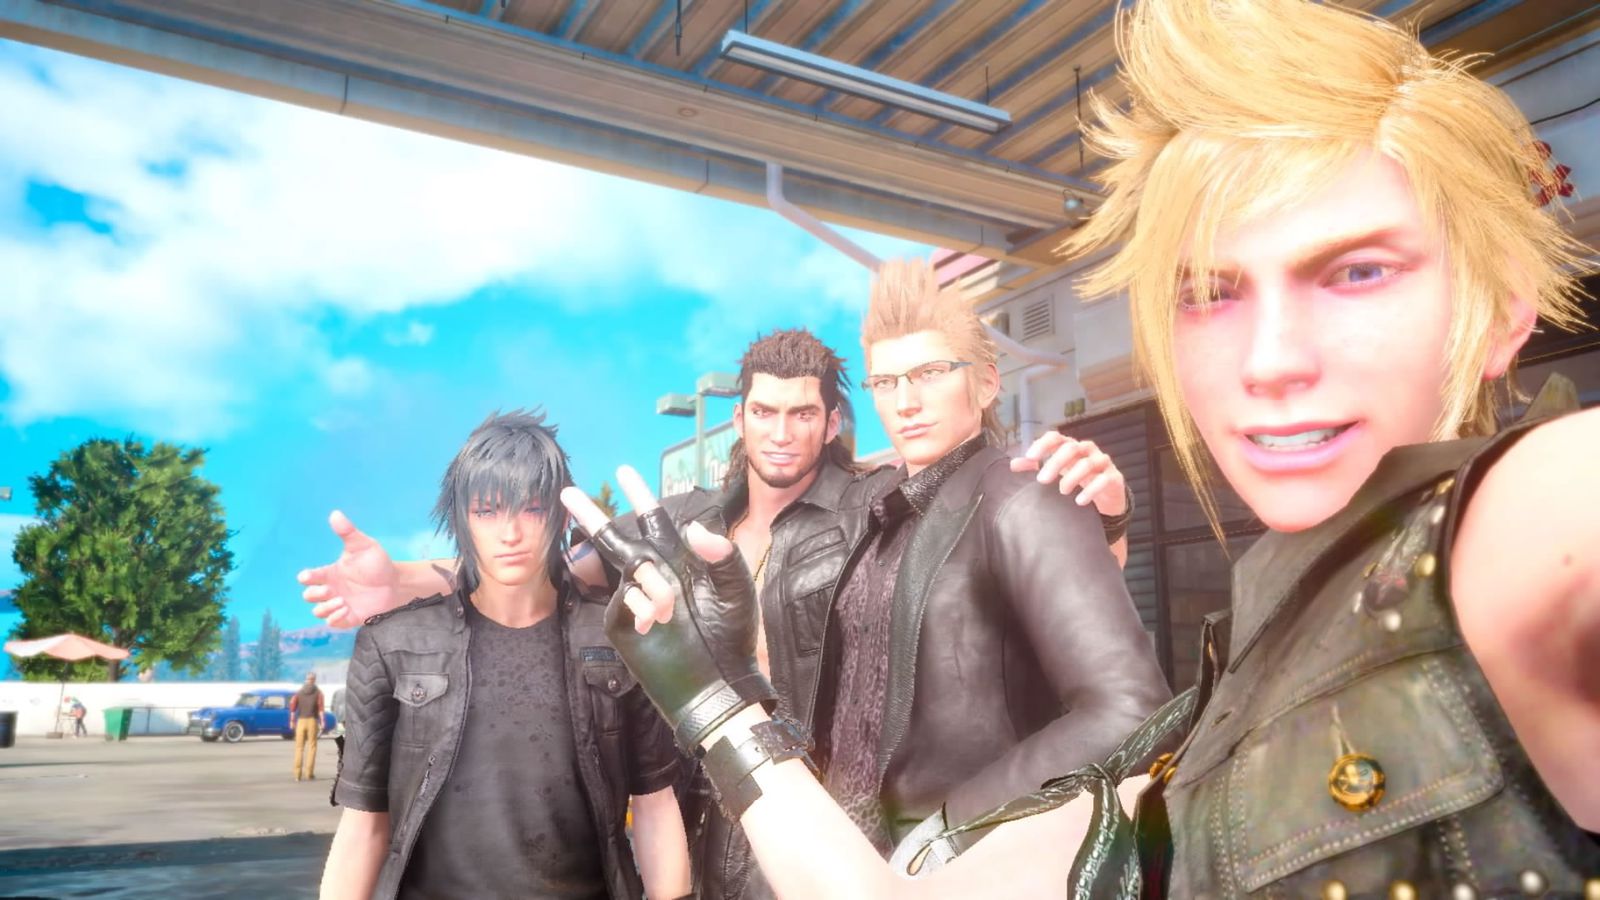 A selfie of all the main characters from Final Fantasy XV